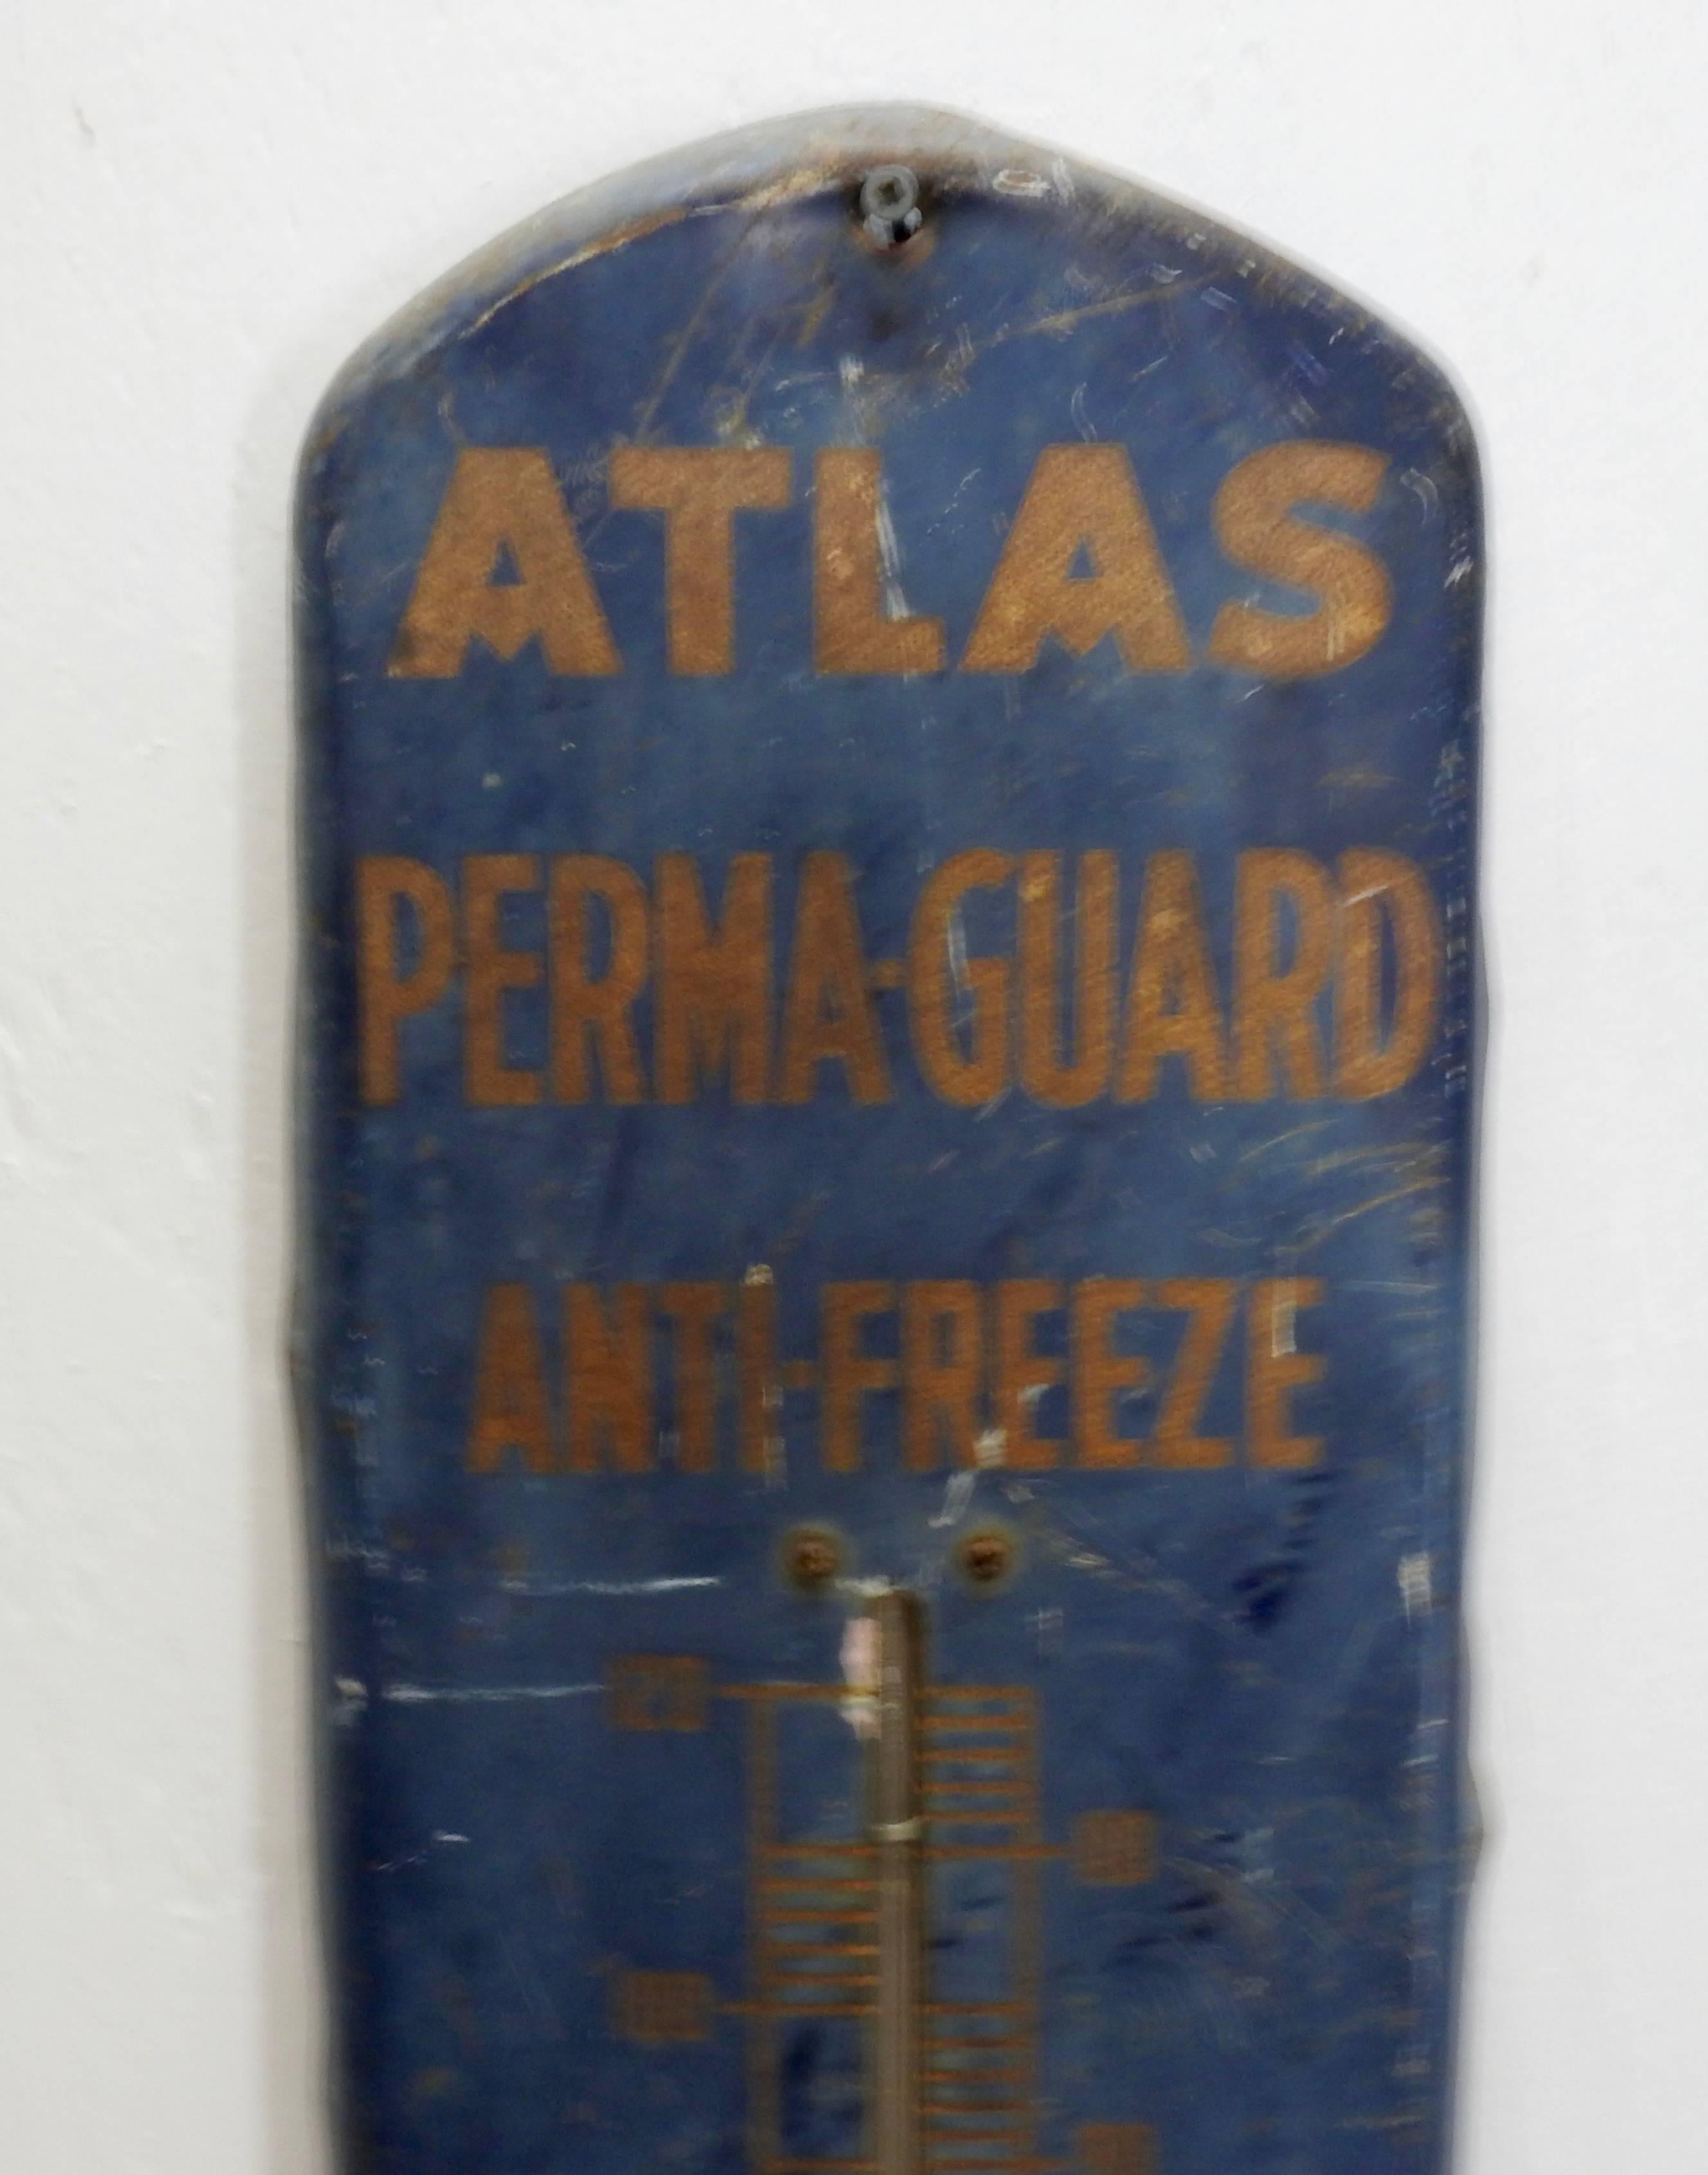 Unique thermometer from the 1950s. Atlas Perma-Guard Anti-Freeze thermometer. Thermometer is accurate. Absolutely a beautiful piece for a man’s garage or even beautiful hanging in your hobby greenhouse.